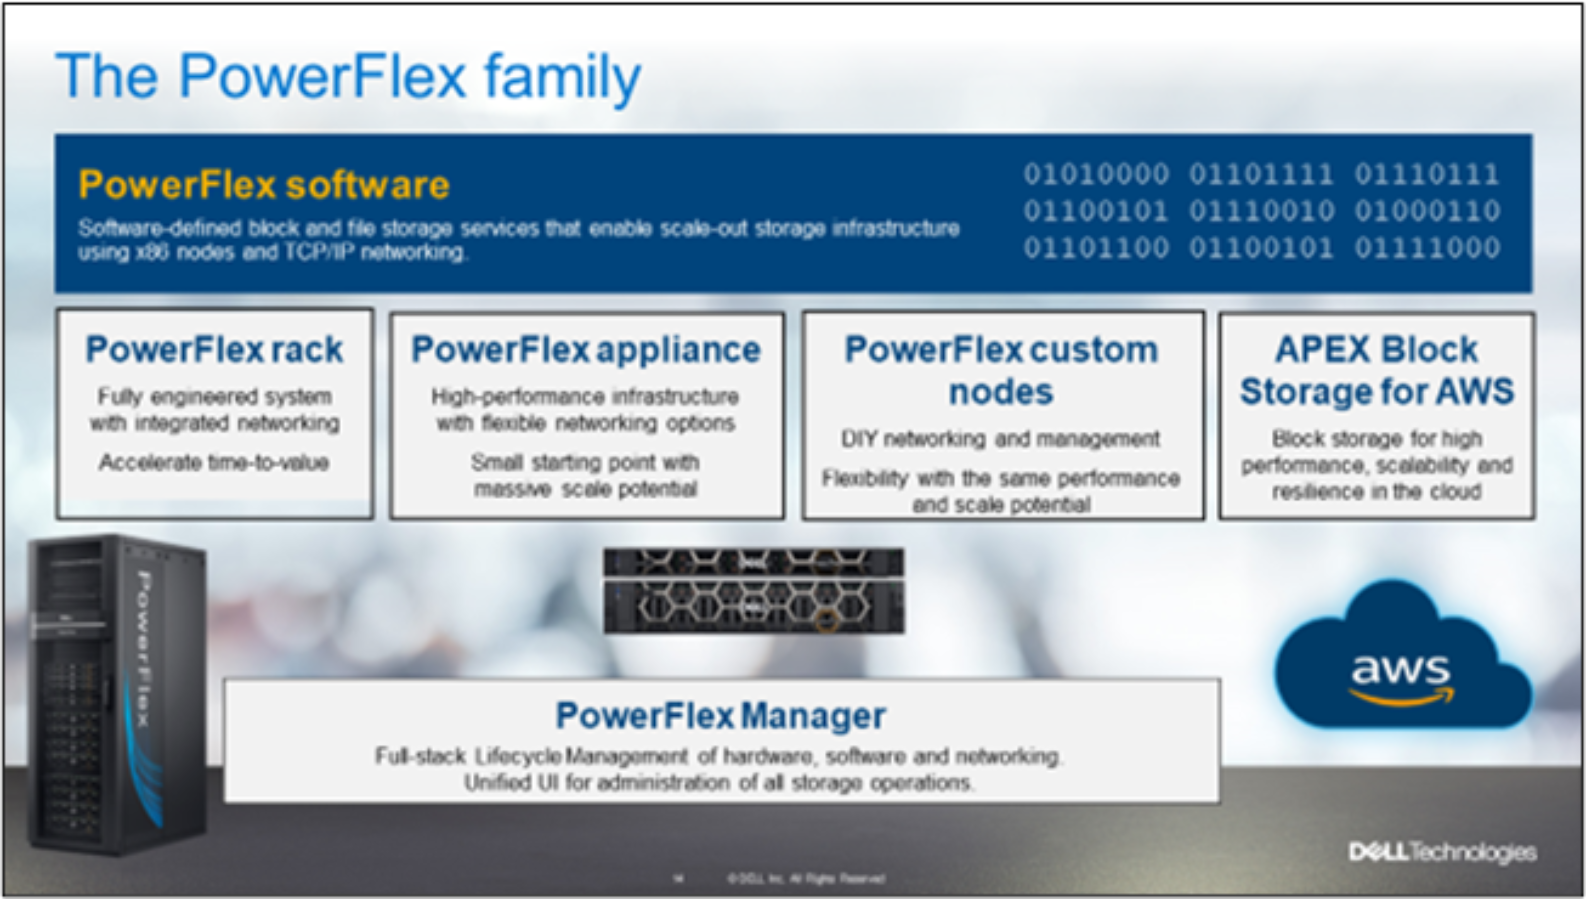 A figure showing the PowerFlex product family.